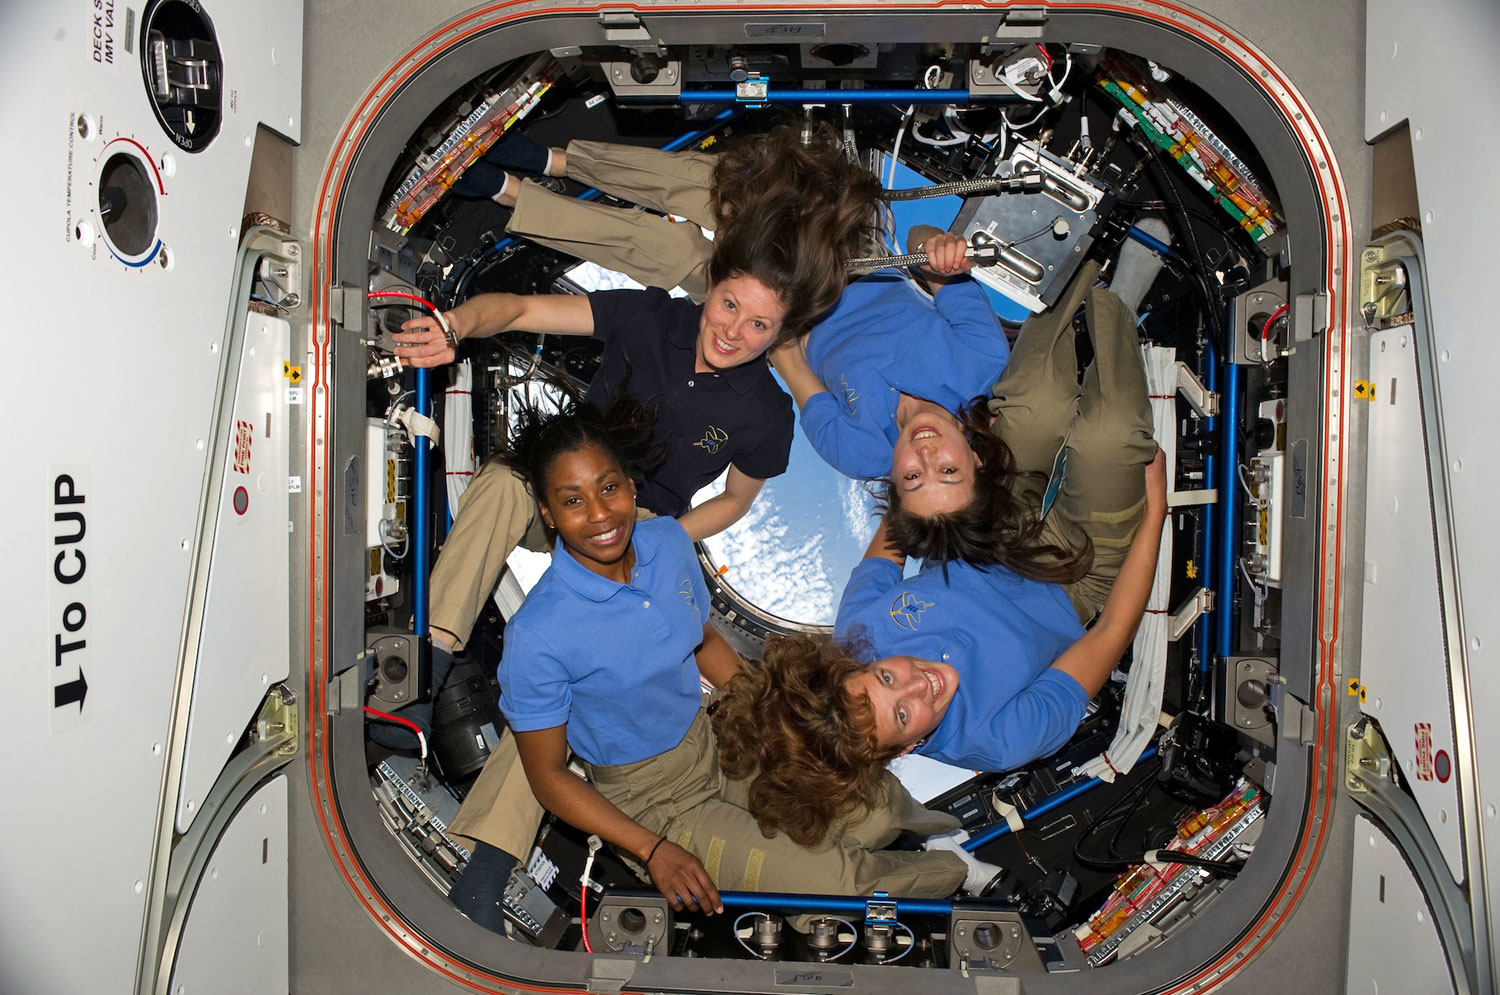 The greatest number of women in space at any one time was four, in 2010. From lower right: NASA astronauts Dorothy Metcalf-Lindenburger, Stephanie Wilson, both STS-131 mission specialists, Tracy Caldwell Dyson, Expedition 23 flight engineer; and Japan Aerospace Exploration Agency (JAXA) astronaut Naoko Yamazaki, STS-131 mission specialist, on the International Space Station in the Cupola.